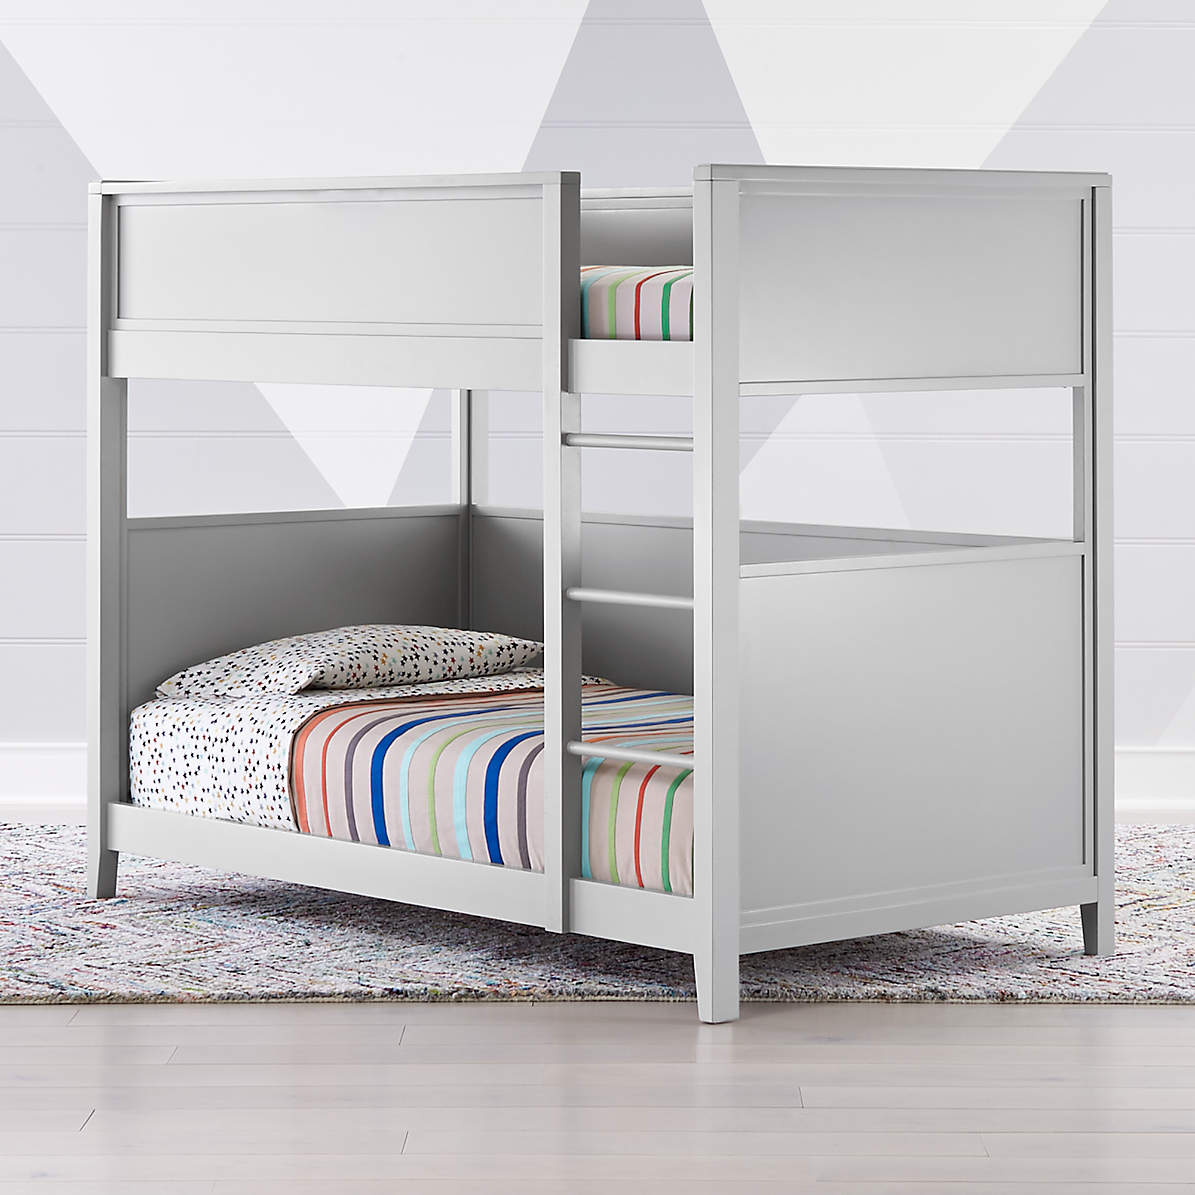 Small Space Kids Twin Bunk Bed, Twin Bunk Beds